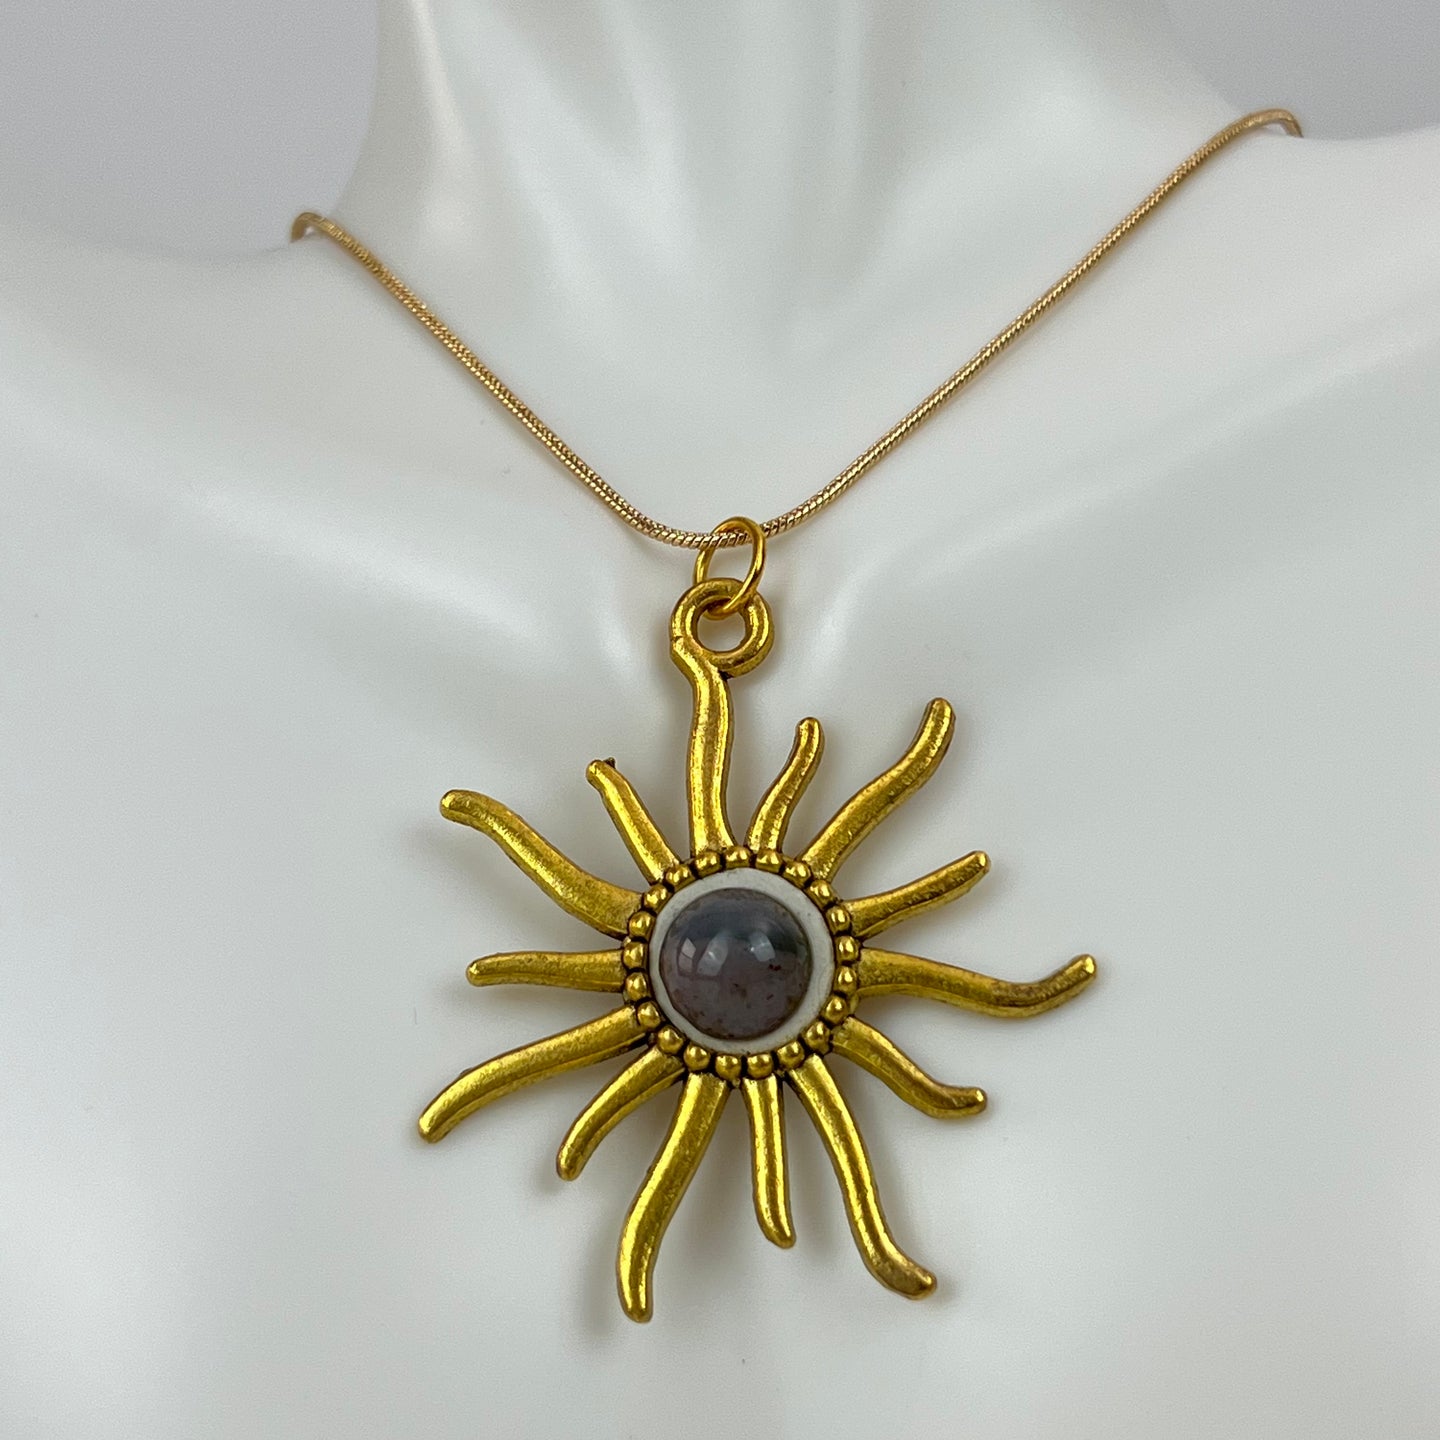 Handcrafted Sunburst Pendant Necklace Gold Plated